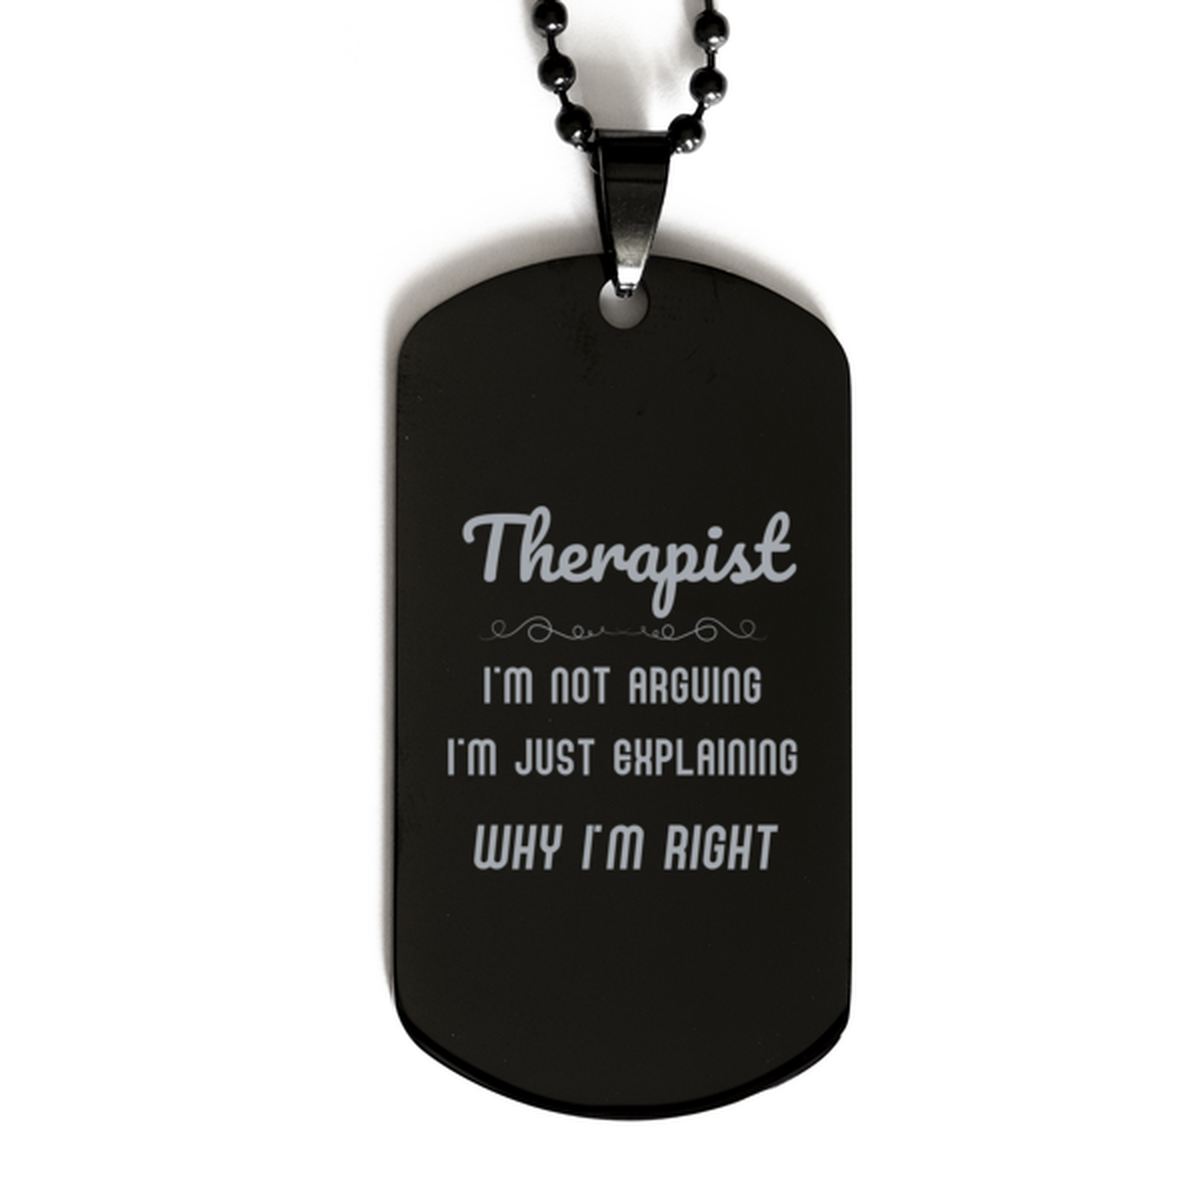 Therapist I'm not Arguing. I'm Just Explaining Why I'm RIGHT Black Dog Tag, Funny Saying Quote Therapist Gifts For Therapist Graduation Birthday Christmas Gifts for Men Women Coworker